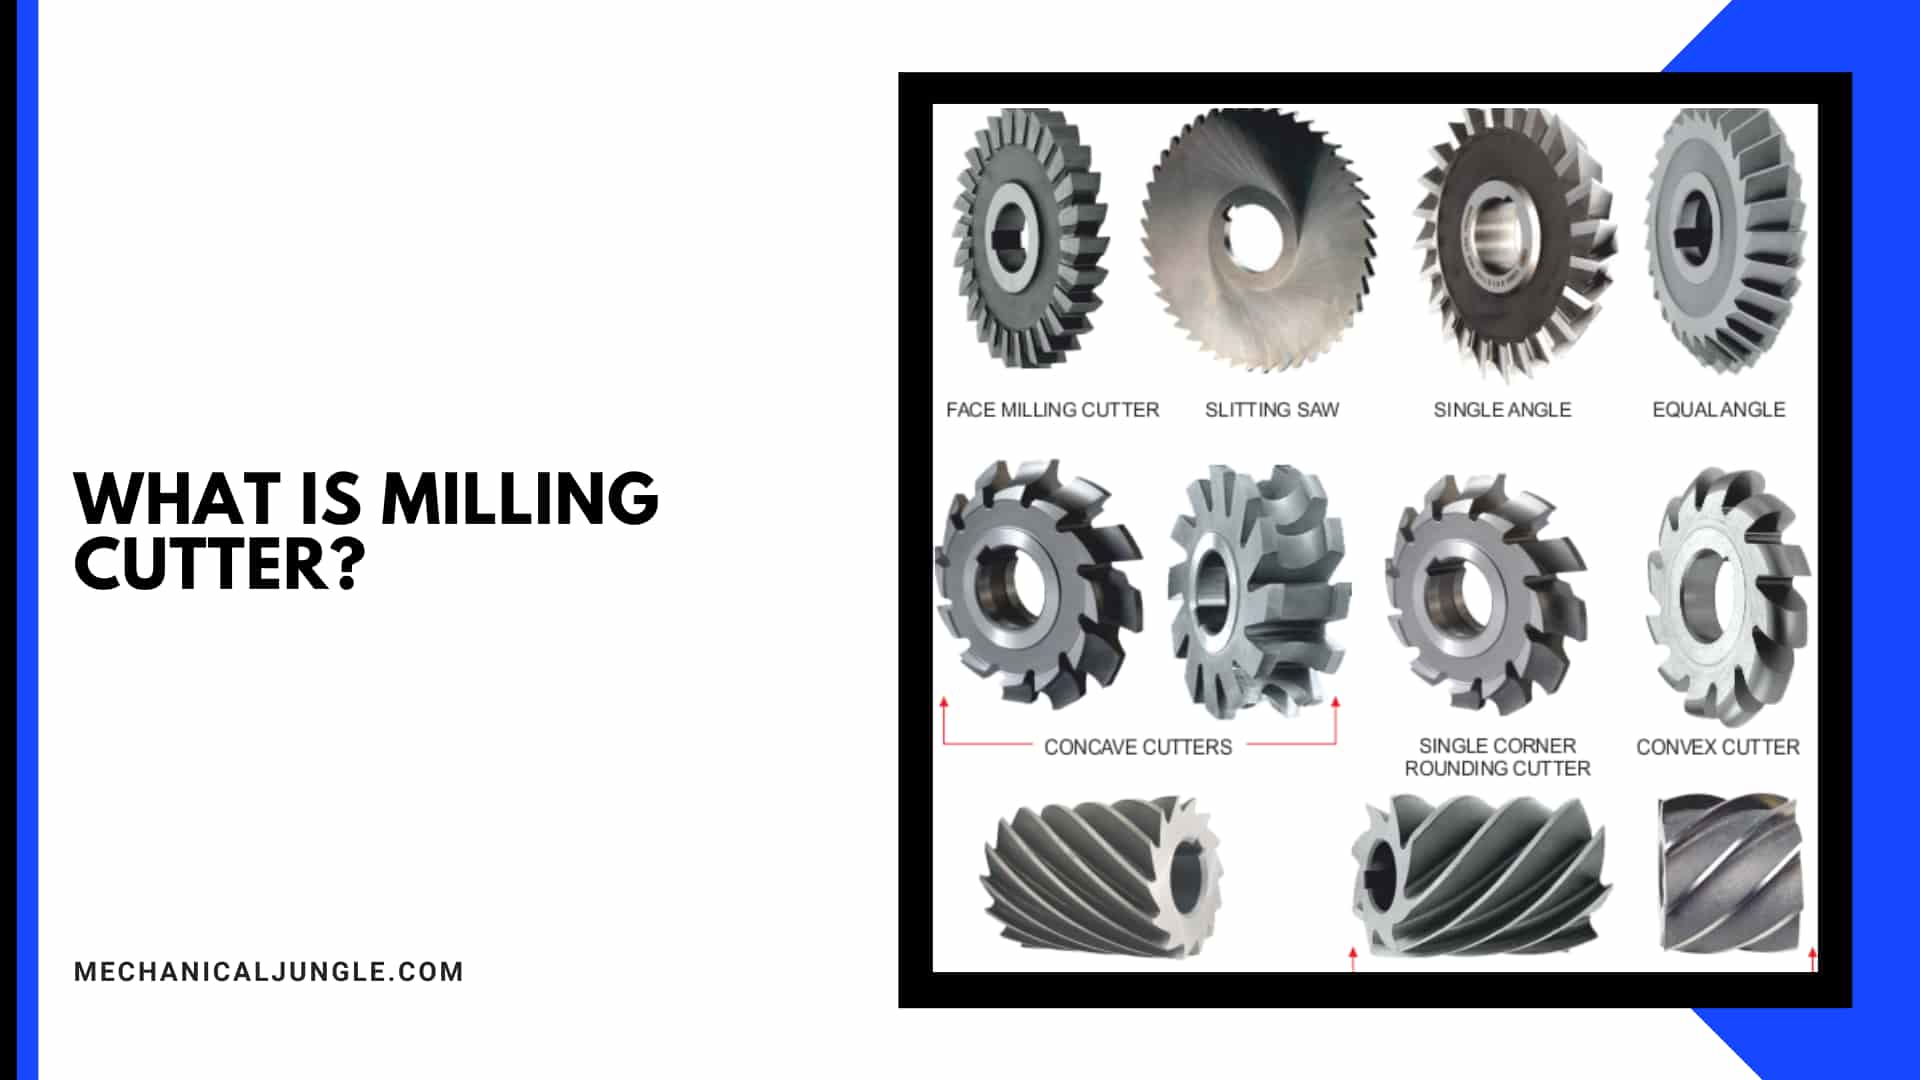 What Is Milling Cutter?